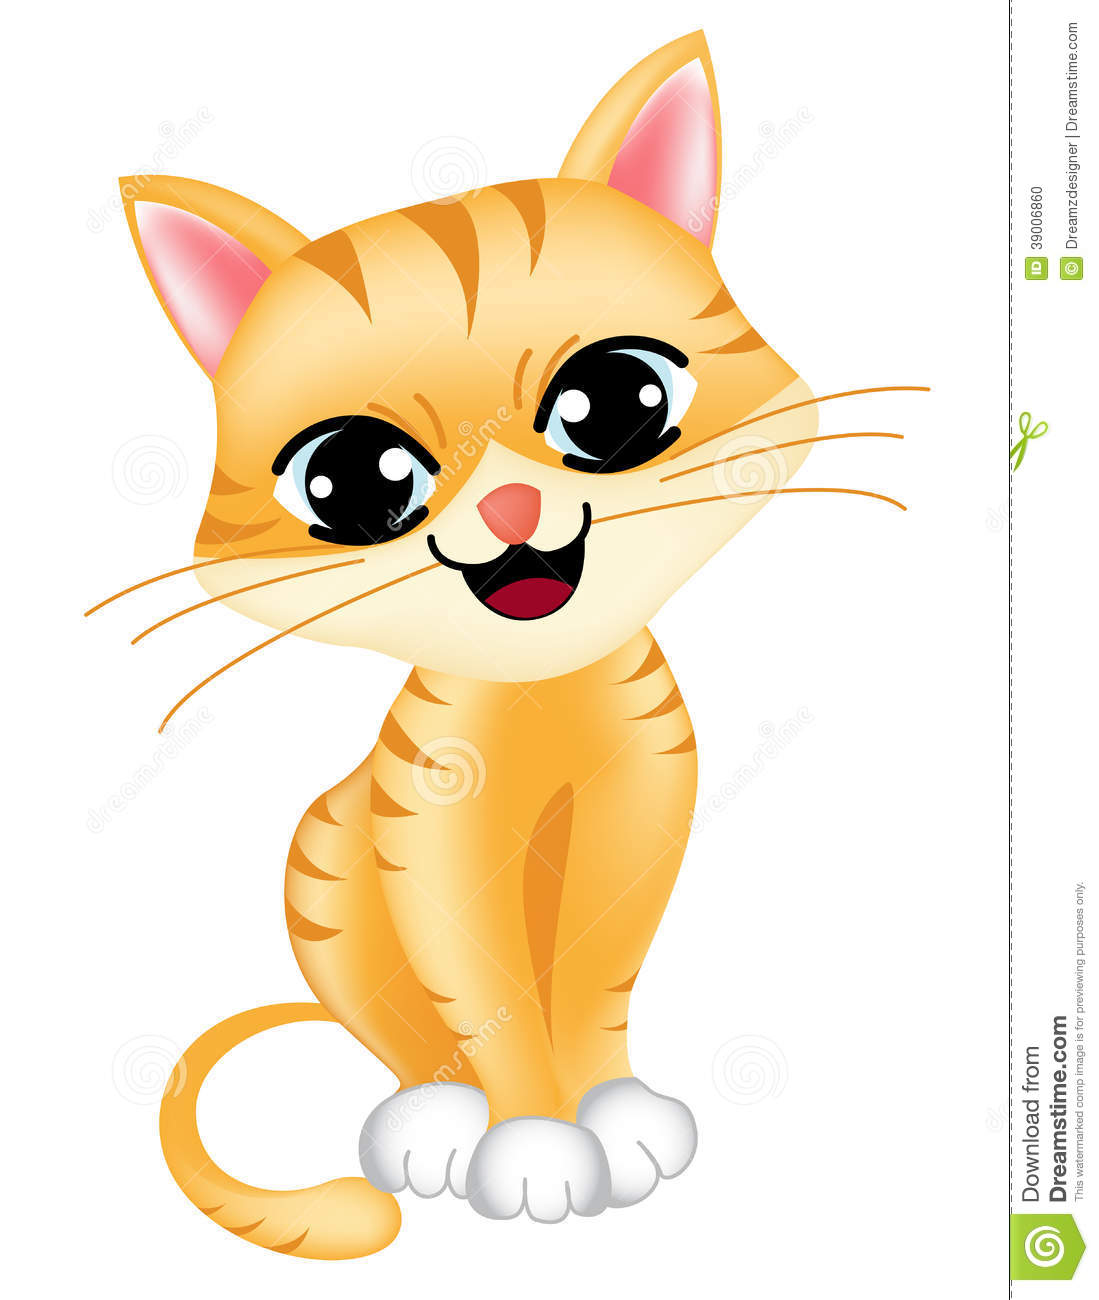 Clipart cats and kittens - .